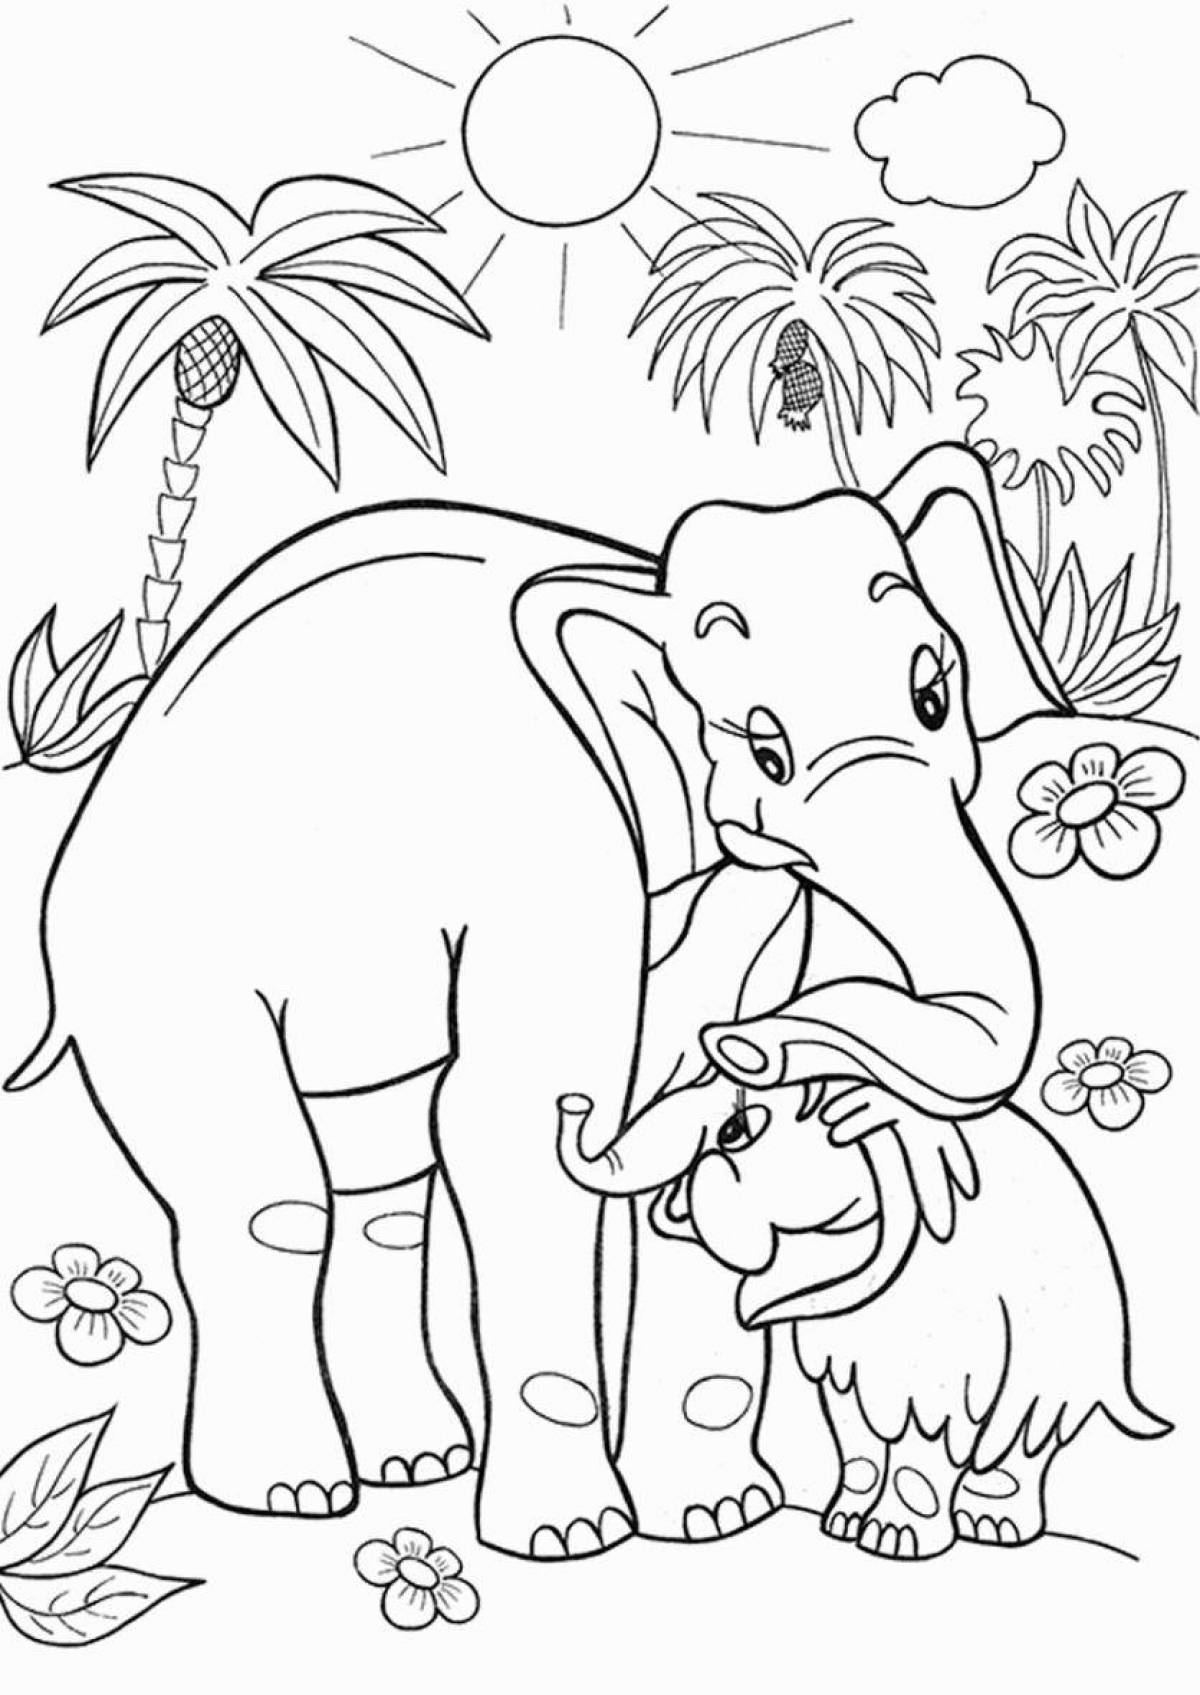 Gorgeous mammoth coloring page